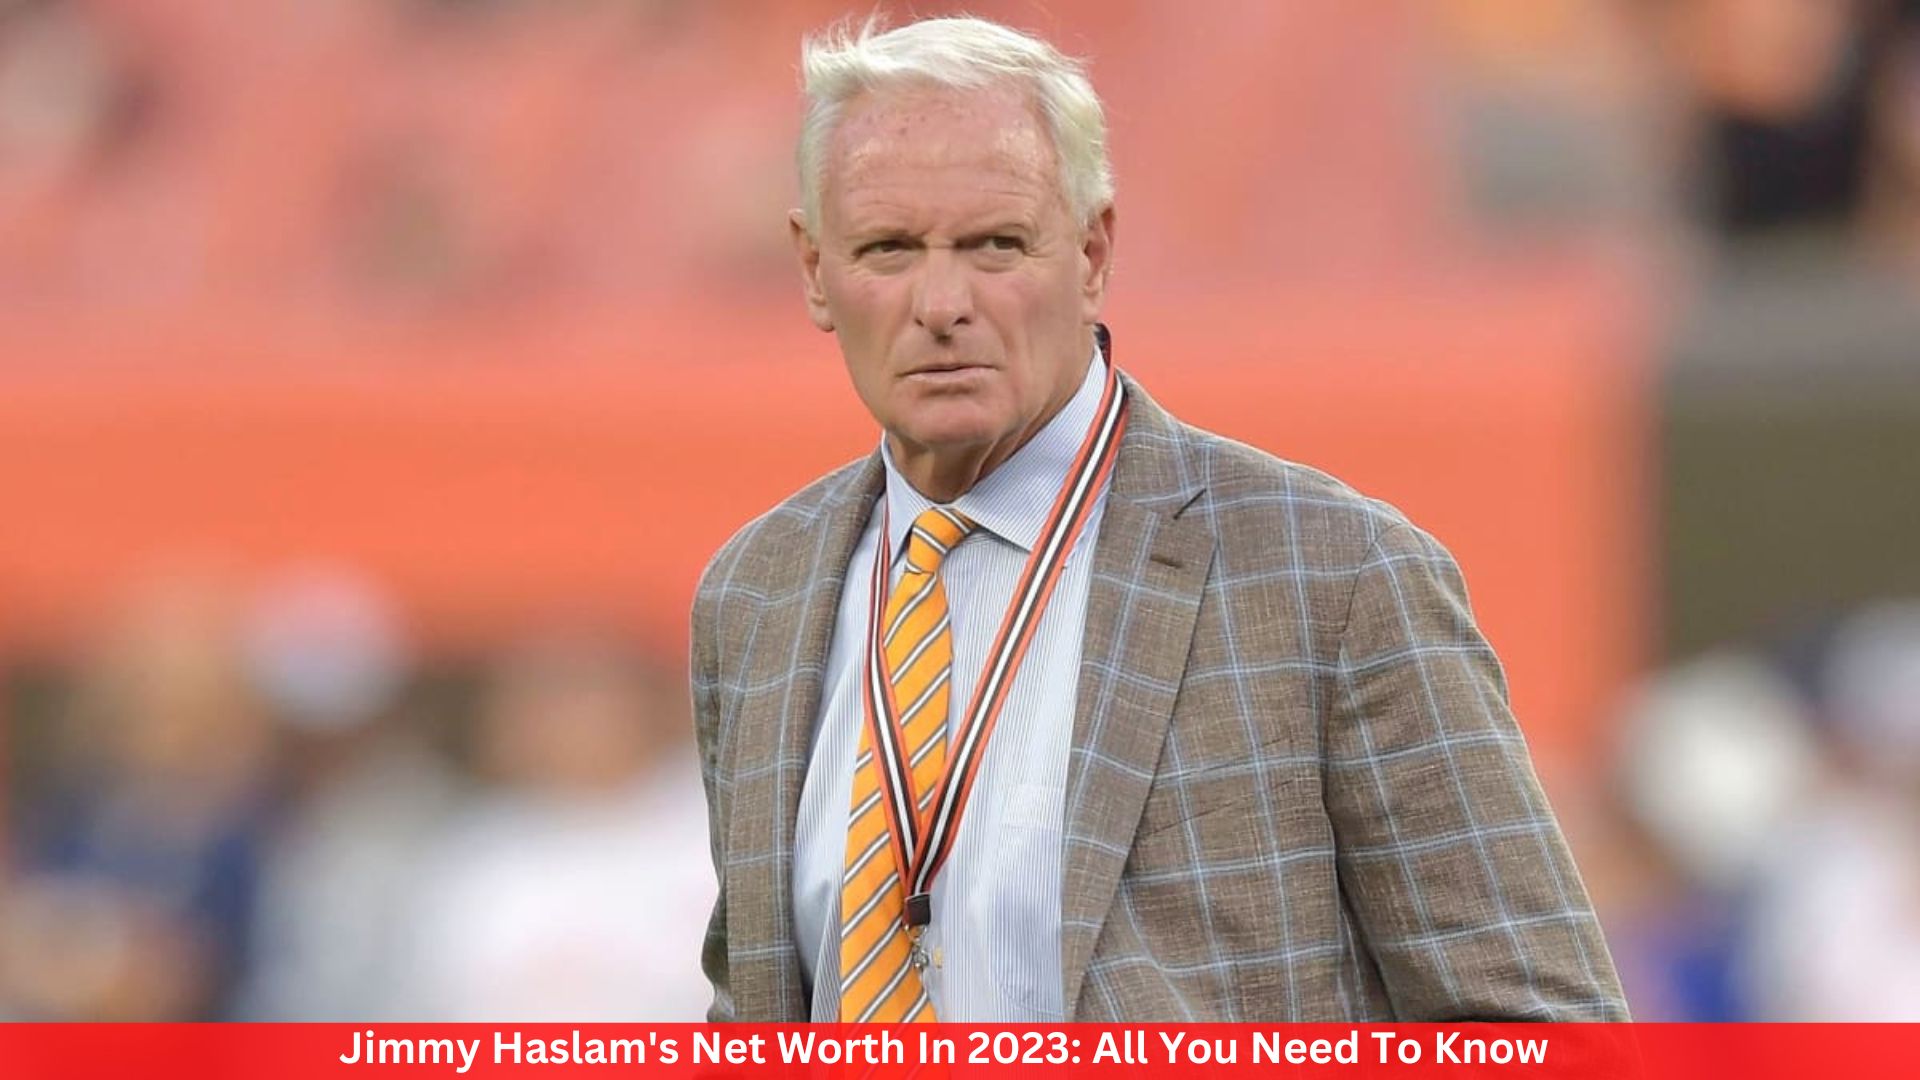 Jimmy Haslam's Net Worth In 2023: All You Need To Know